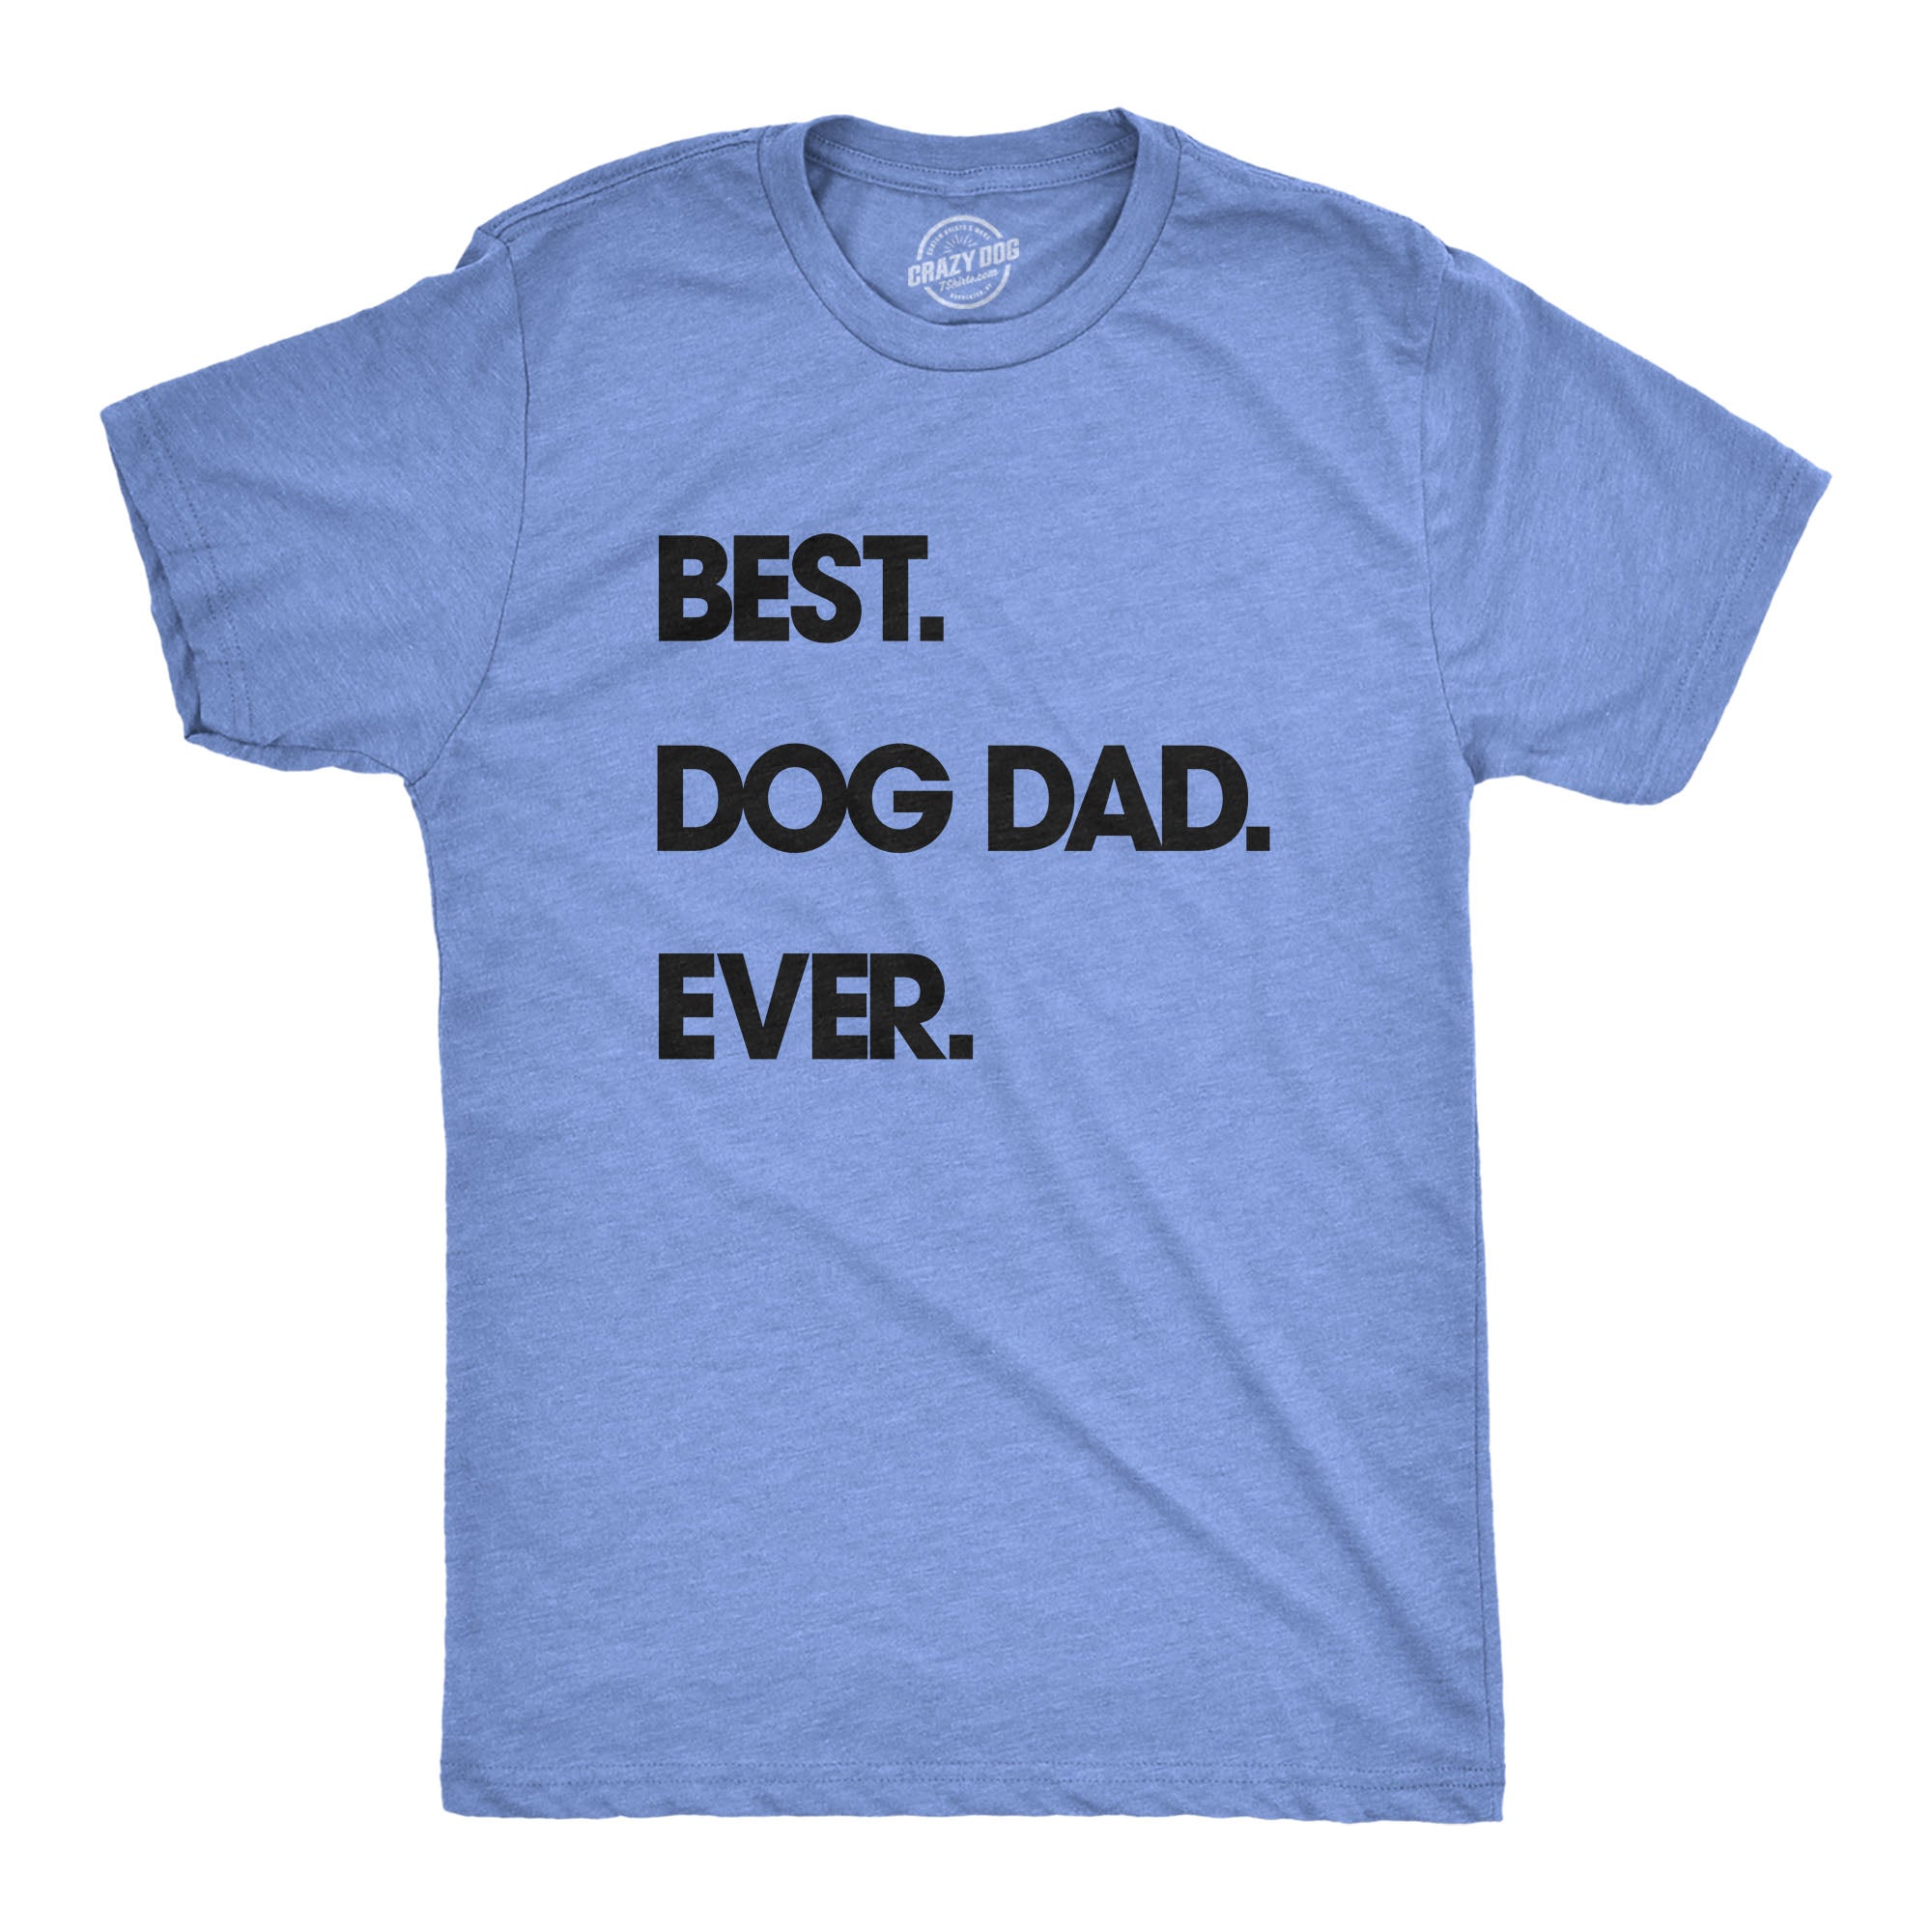 Funny Light Heather Grey Best Dog Dad Ever Mens T Shirt Nerdy Father's Day Dog Tee